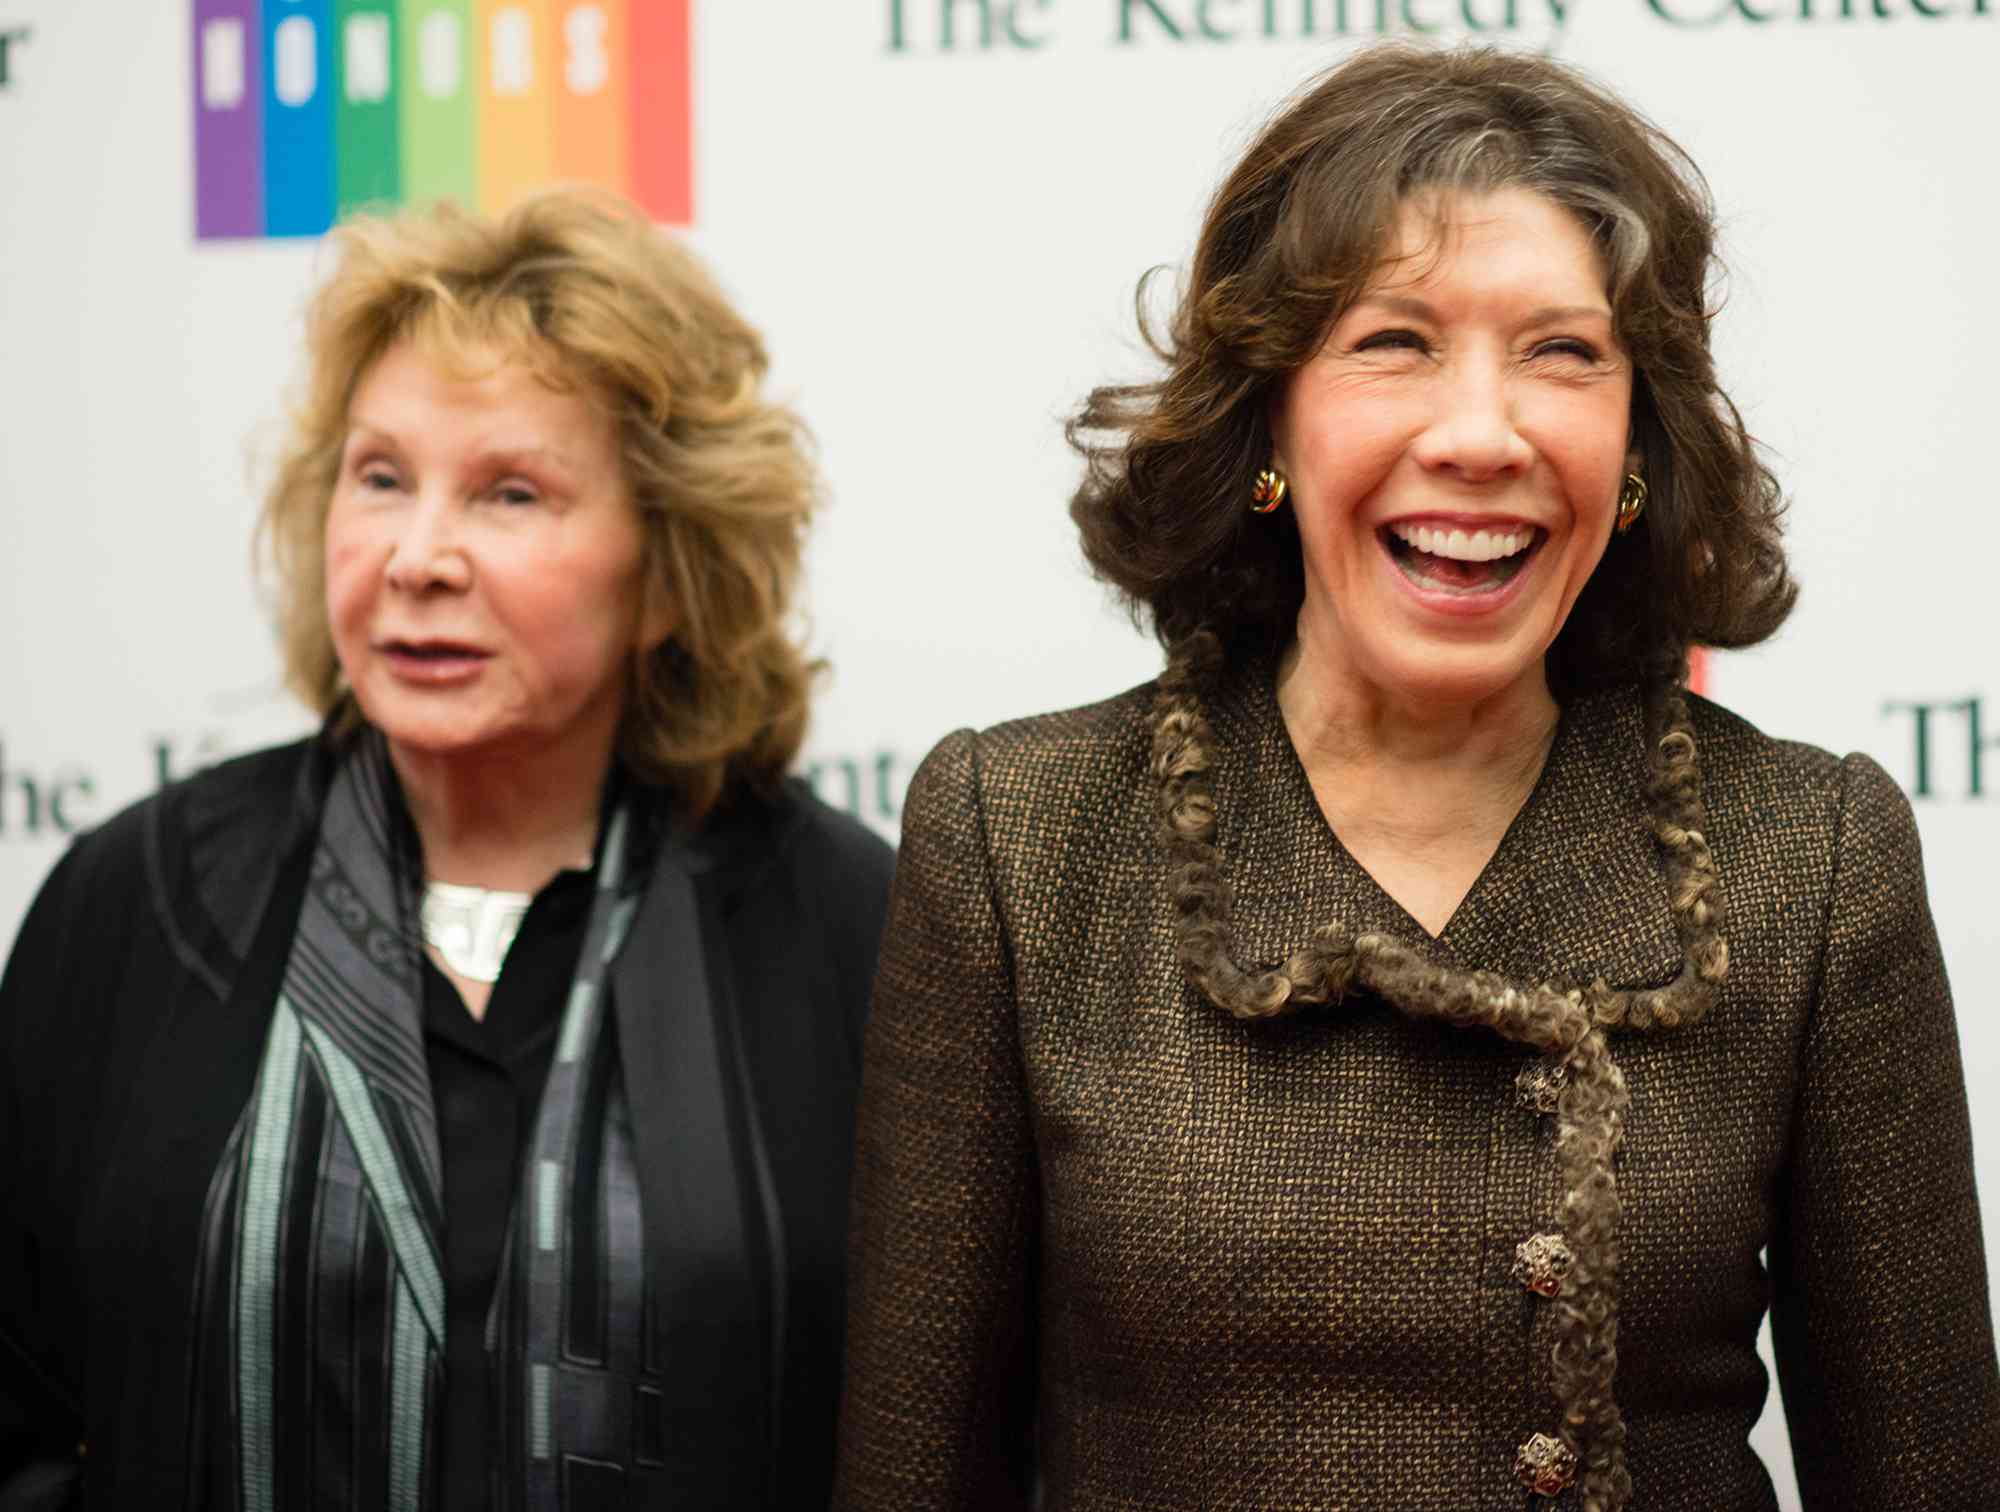 Lily Tomlin Reflects on Jennifer Aniston's '9 to 5' Remake: 'The Working World Has Changed' (Exclusive)